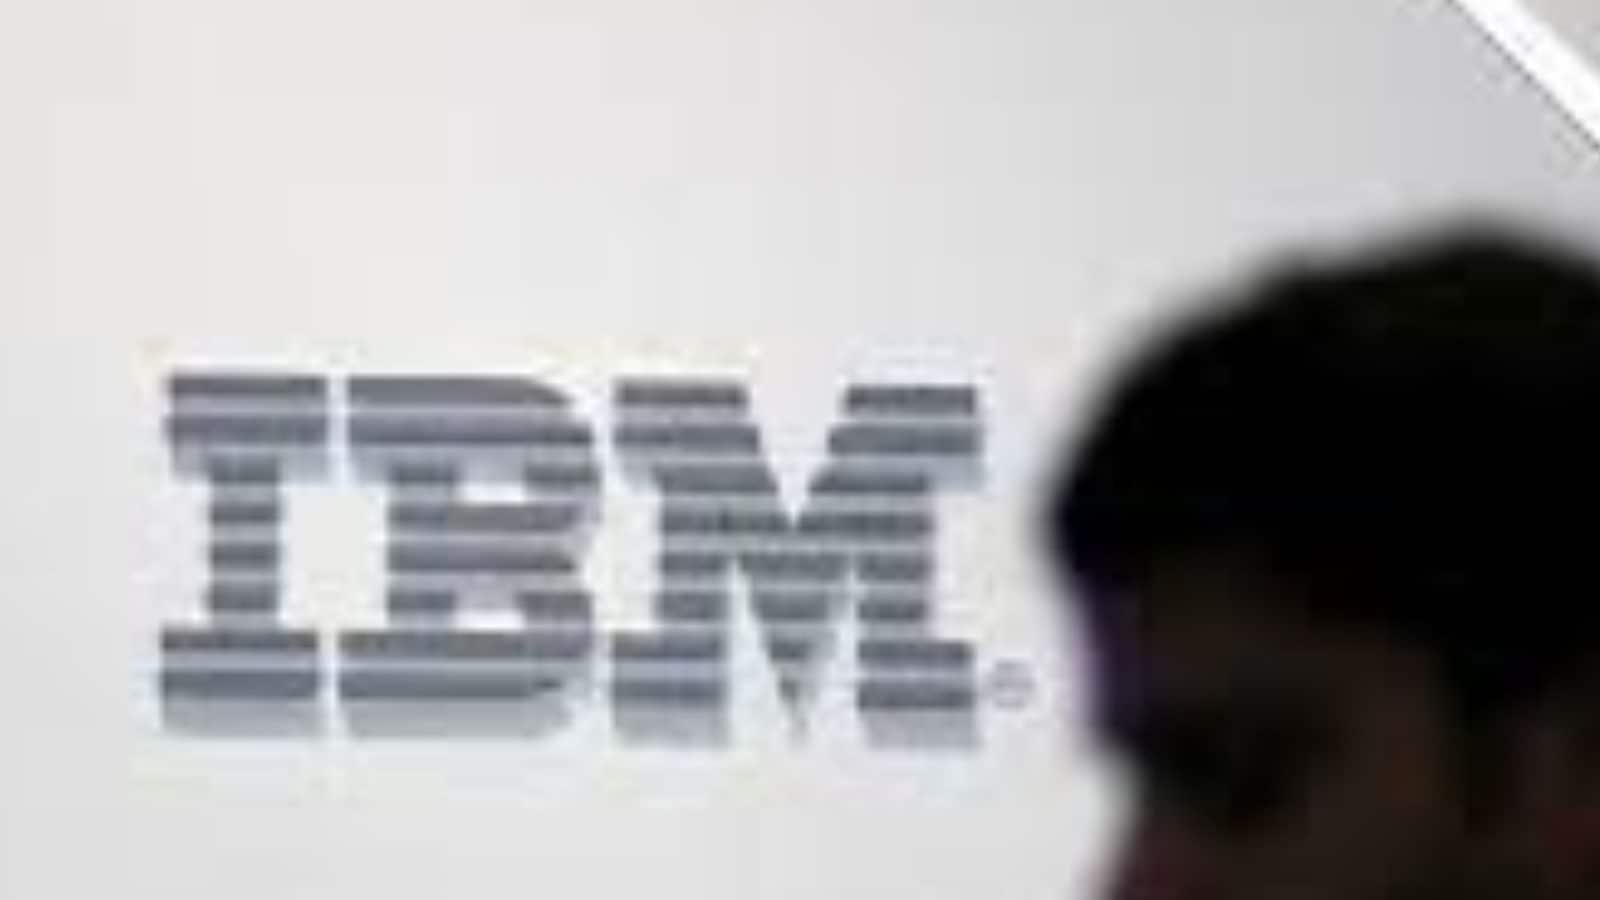 Read more about the article Tech Major IBM Lays Off 3,900 Employees, Bets Big On Hybrid Cloud, AI